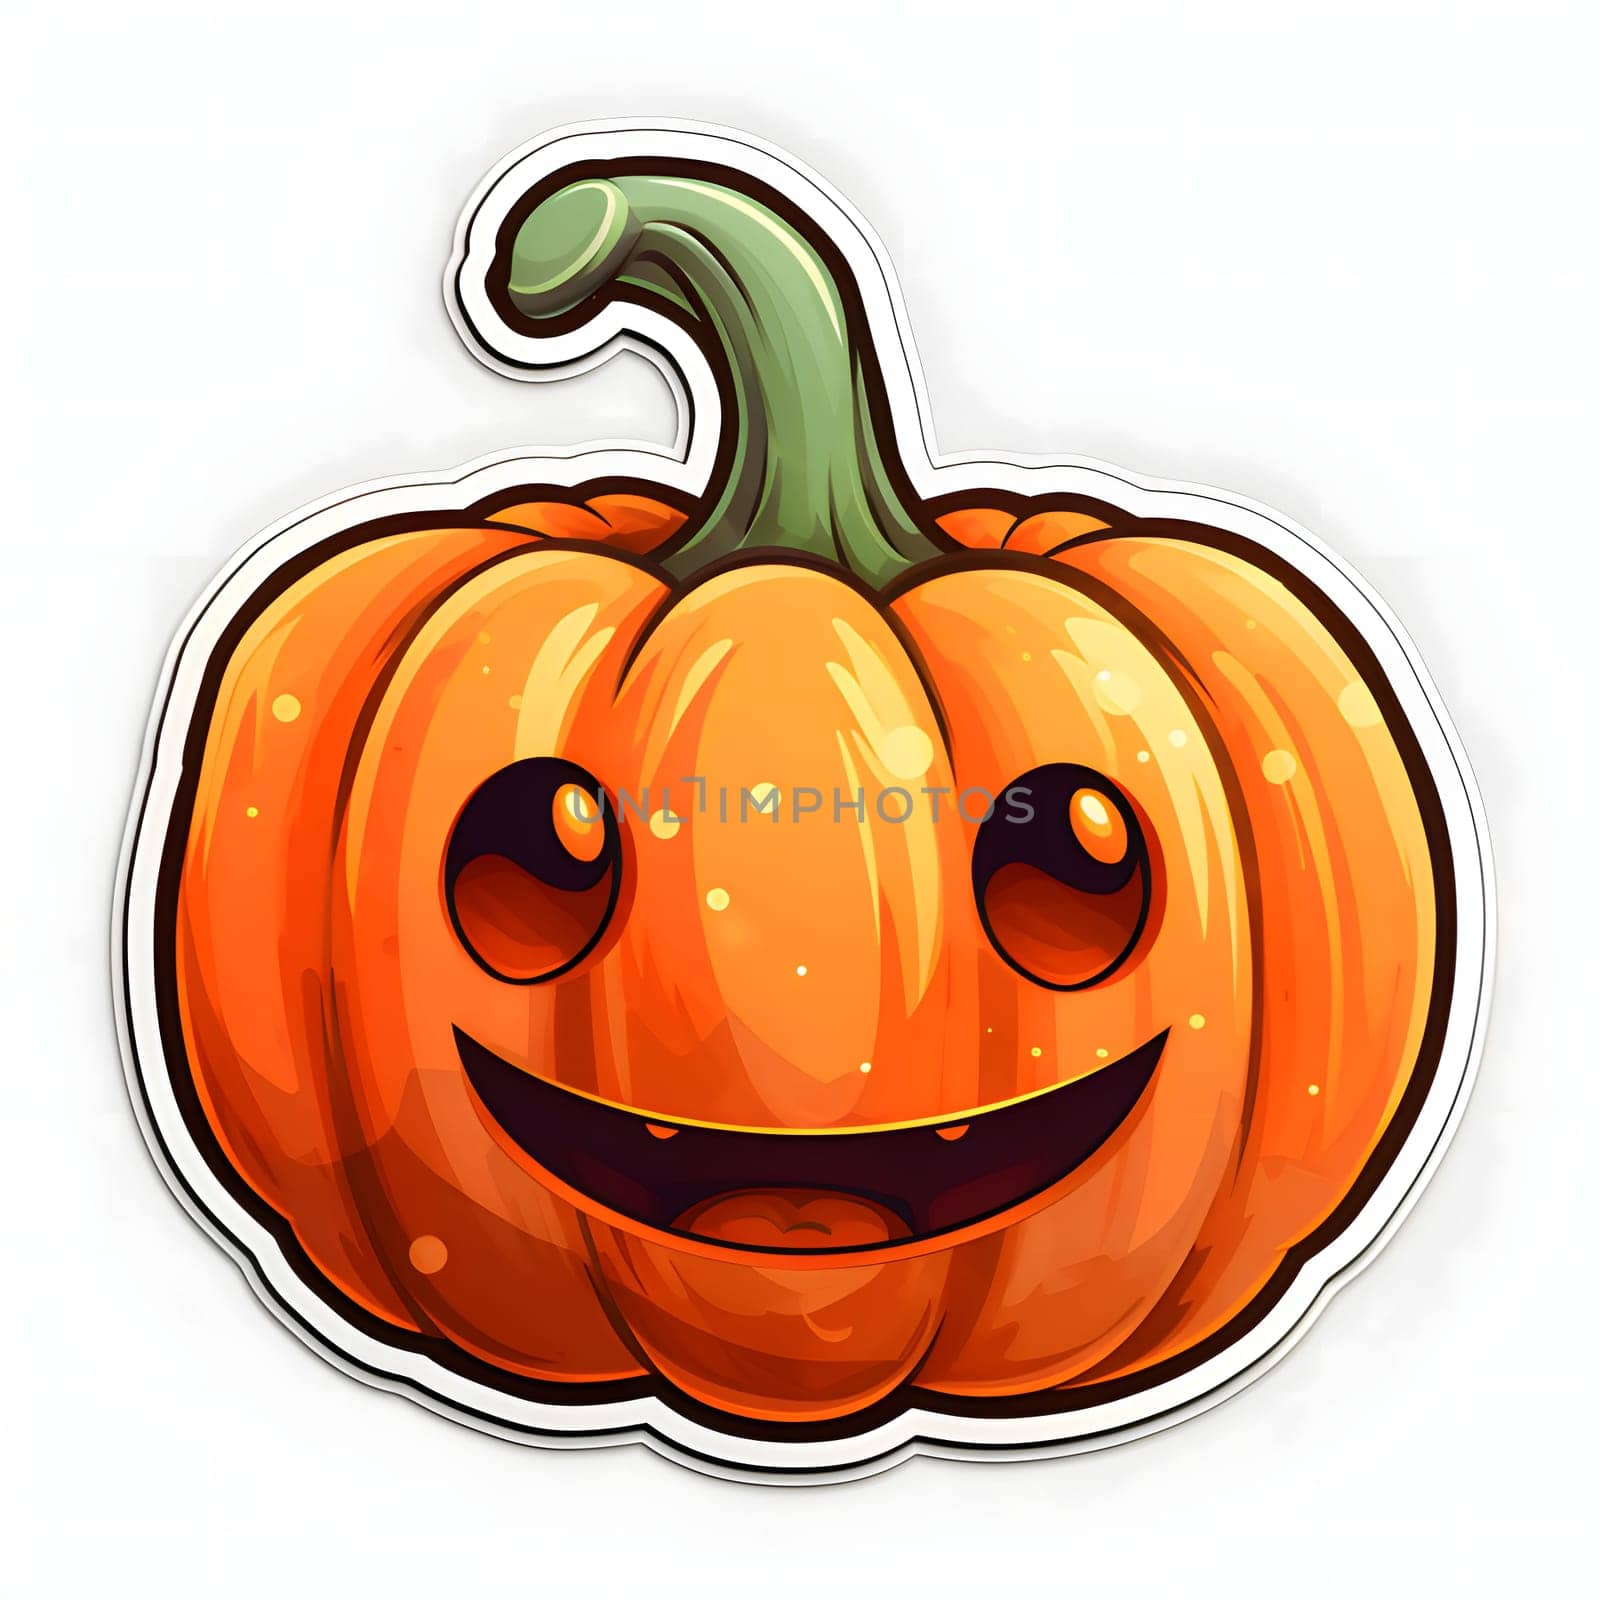 Smiling pumpkin sticker, Halloween image on a white isolated background. Atmosphere of darkness and fear.